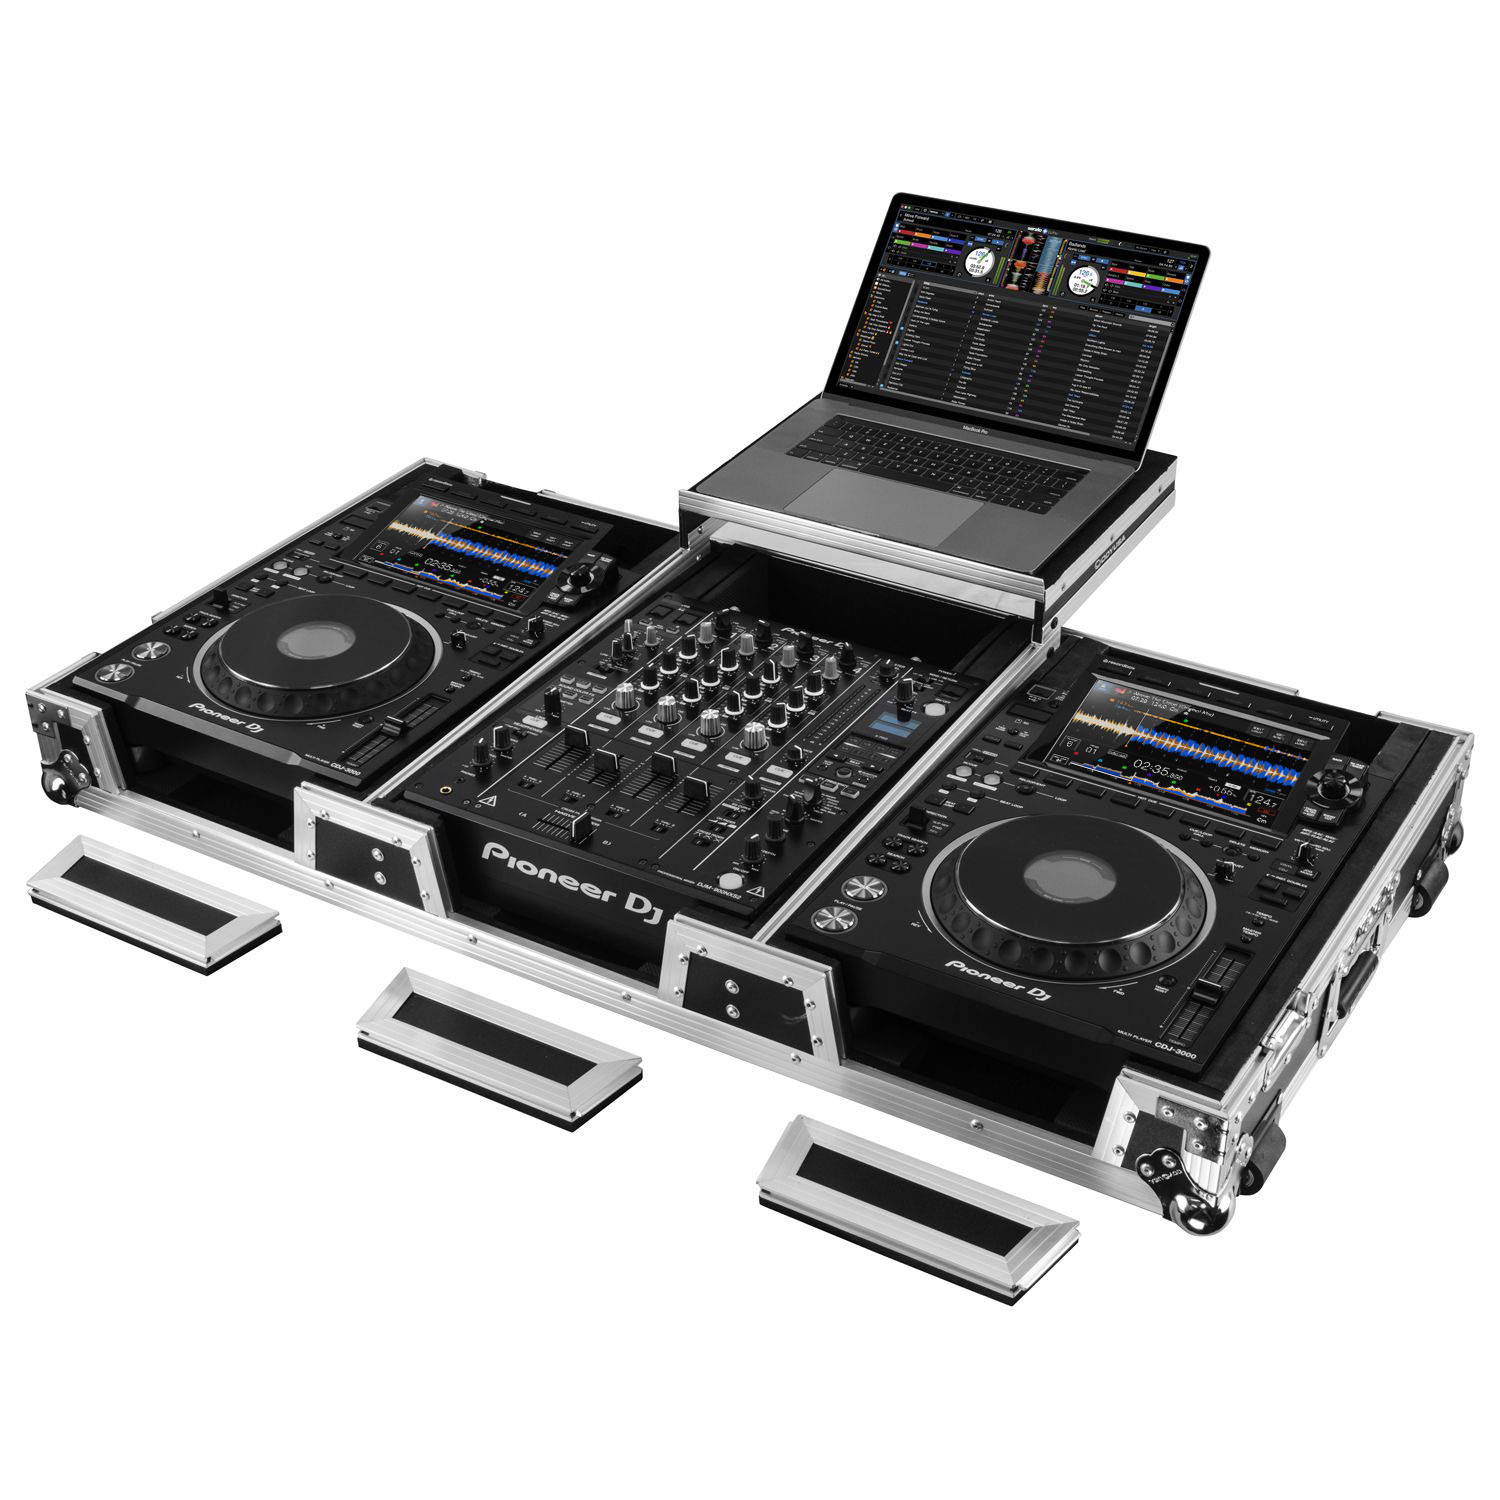 Odyssey FZGS12CDJWXD2 - Extra Deep DJ Coffin Case for 12″ Format DJ Mixer  and Two Media Players with Glide Platform